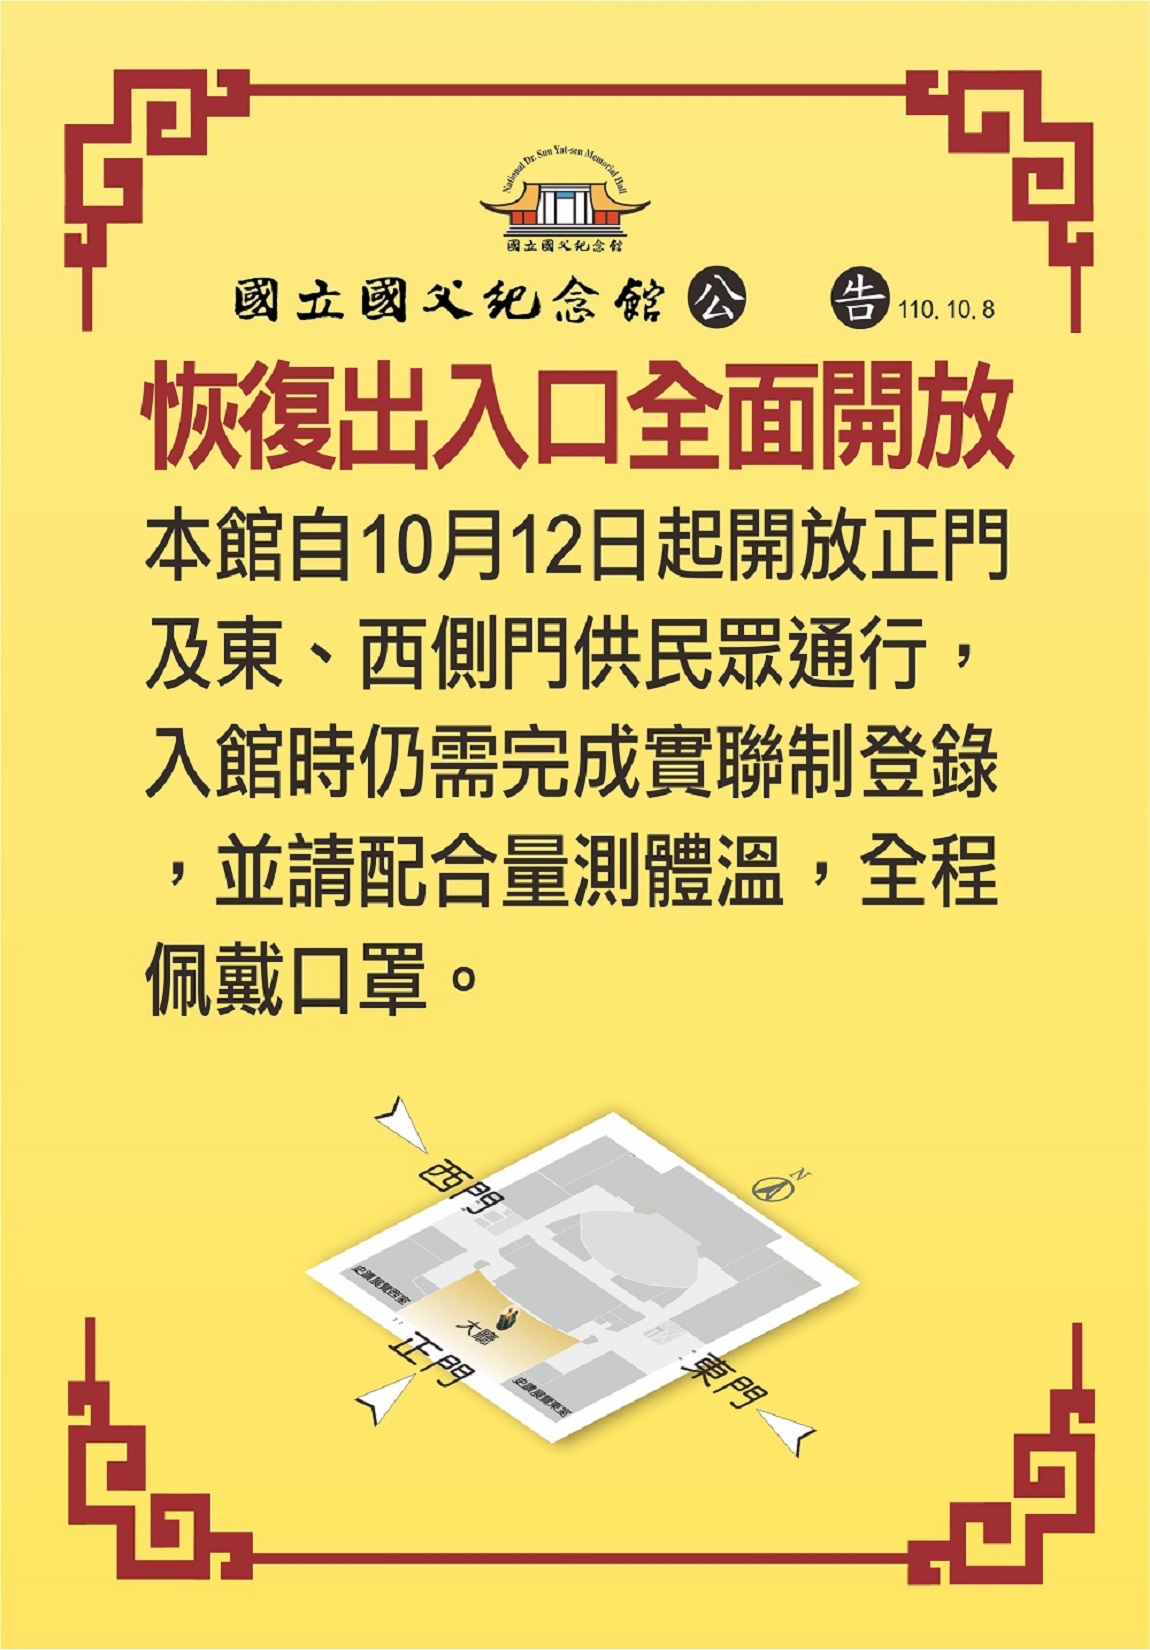 Since October 12, 110, the main entrance and the east and west side entrances of the museum will be reopened to pass, and the joint system will be adopted to register and visit the museum.jpg